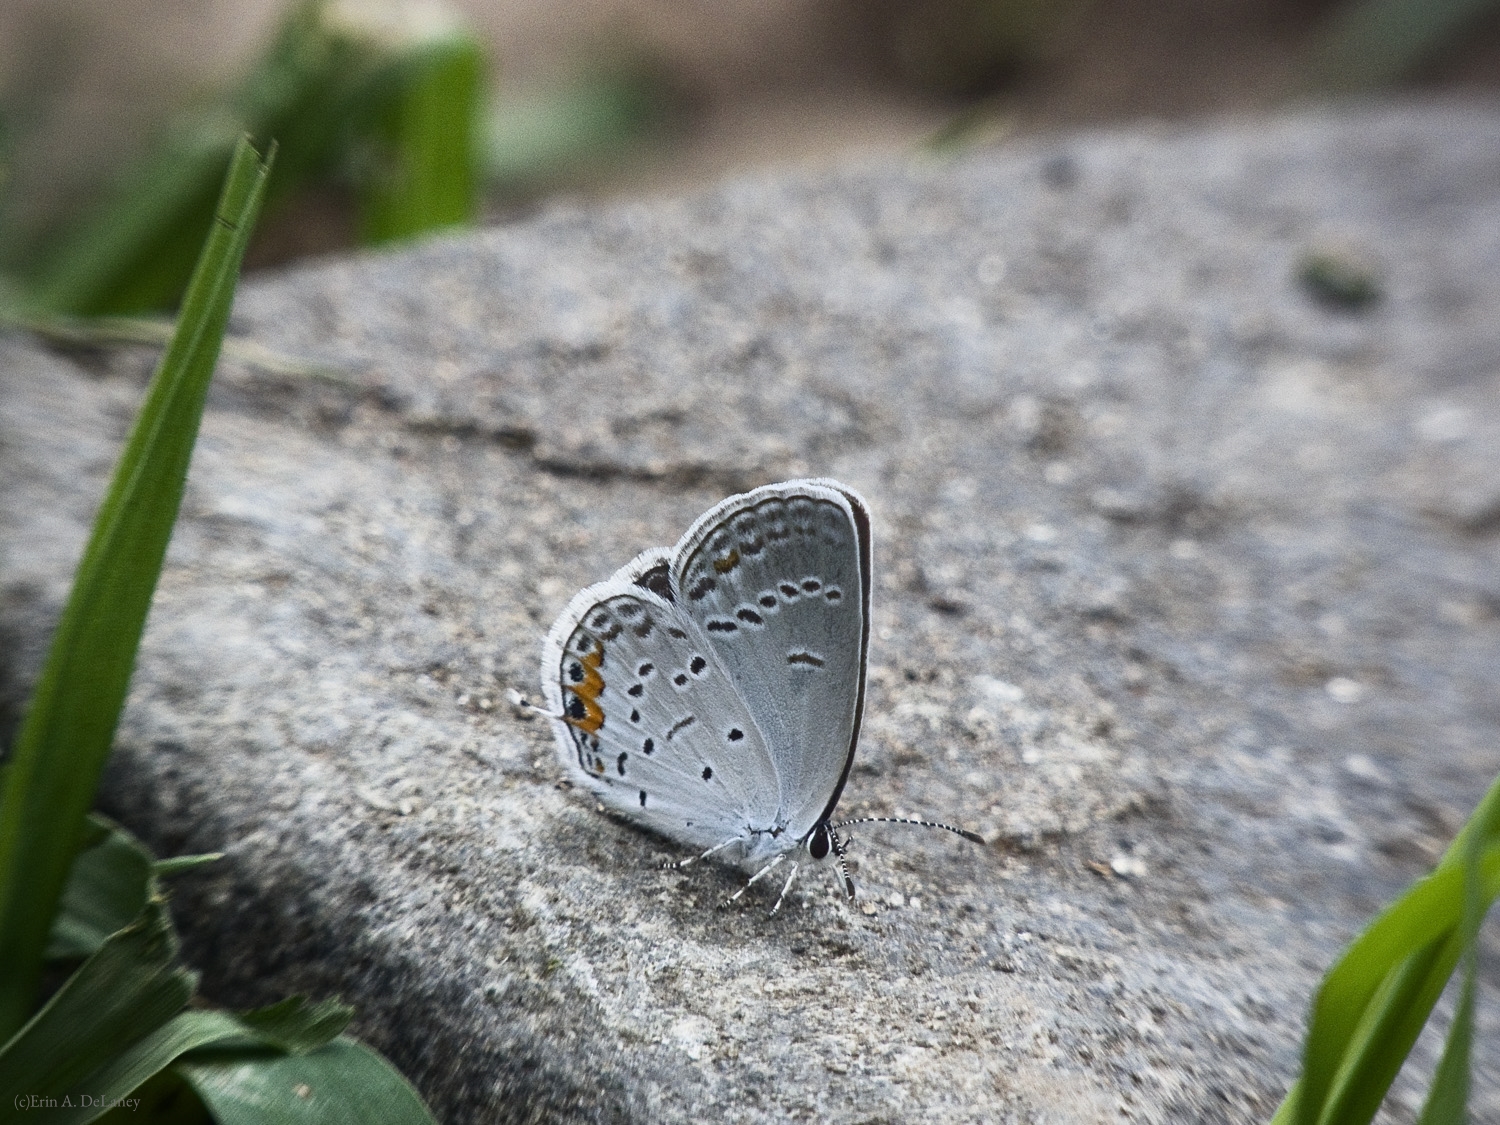 Eastern Tailed Blue Butterfly Resting on a Rock, 2014